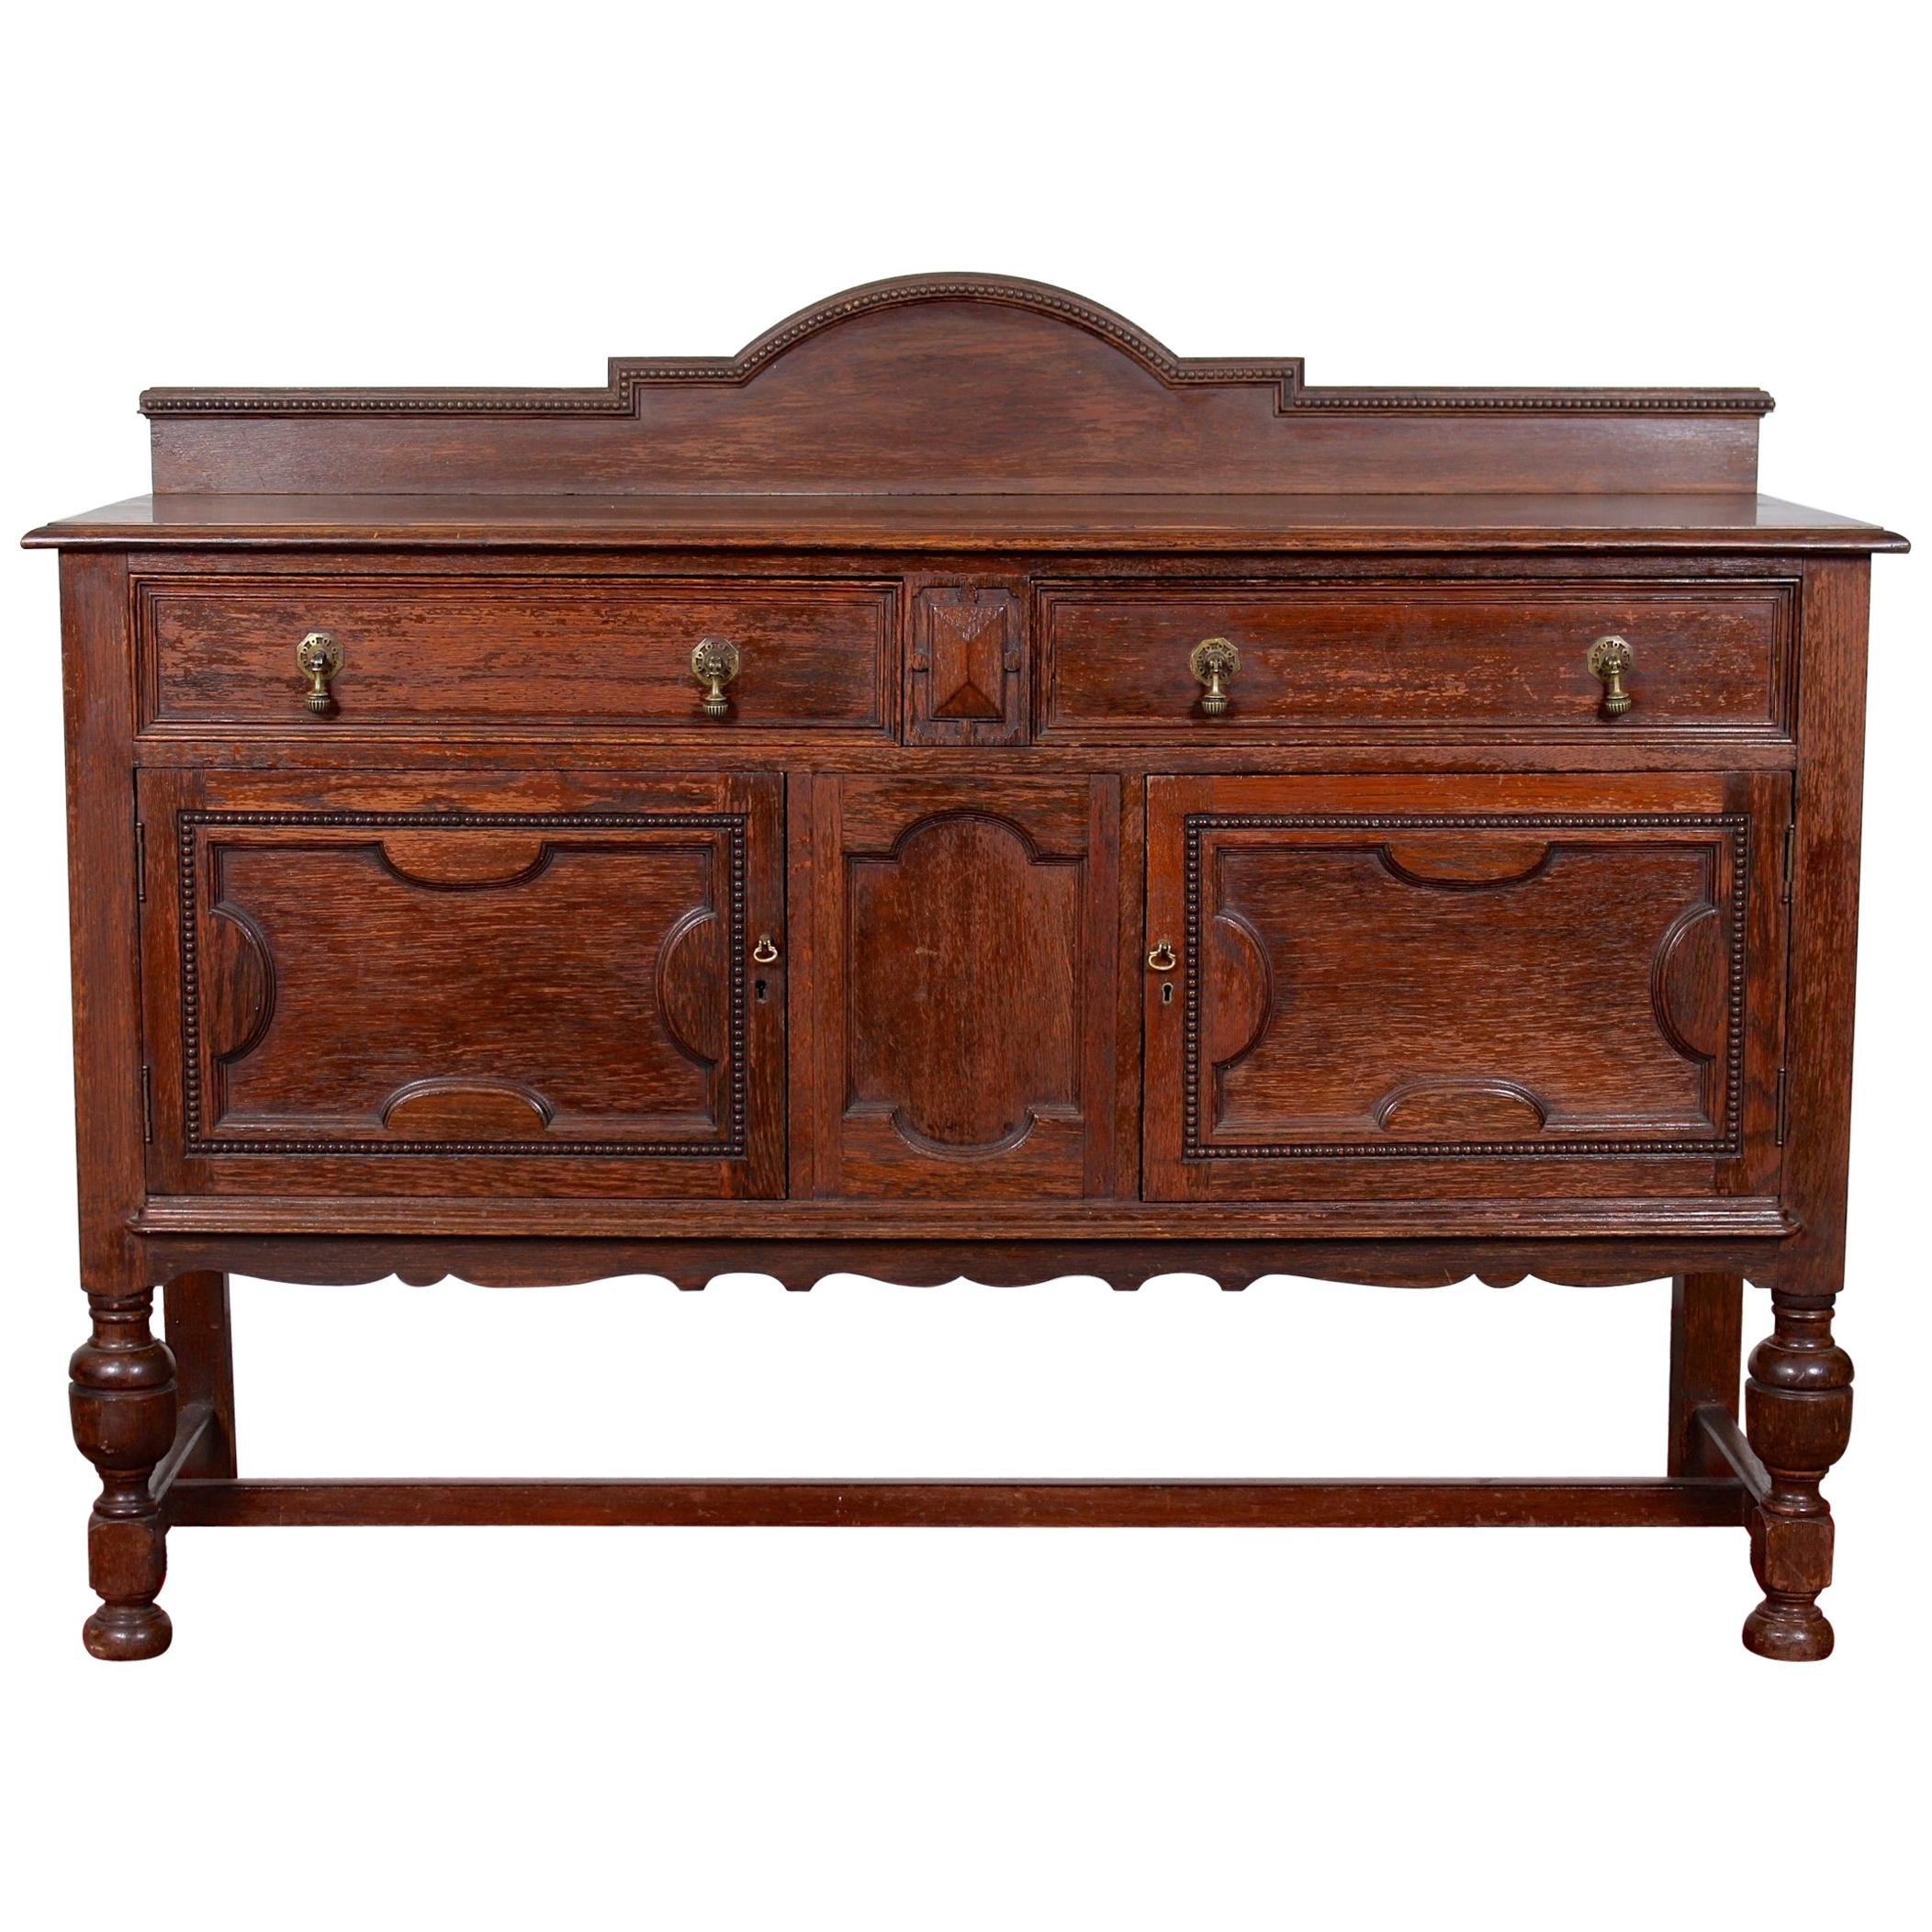 Maple and Co Oak Sideboard For Sale at 1stDibs | maple and co sideboard ...